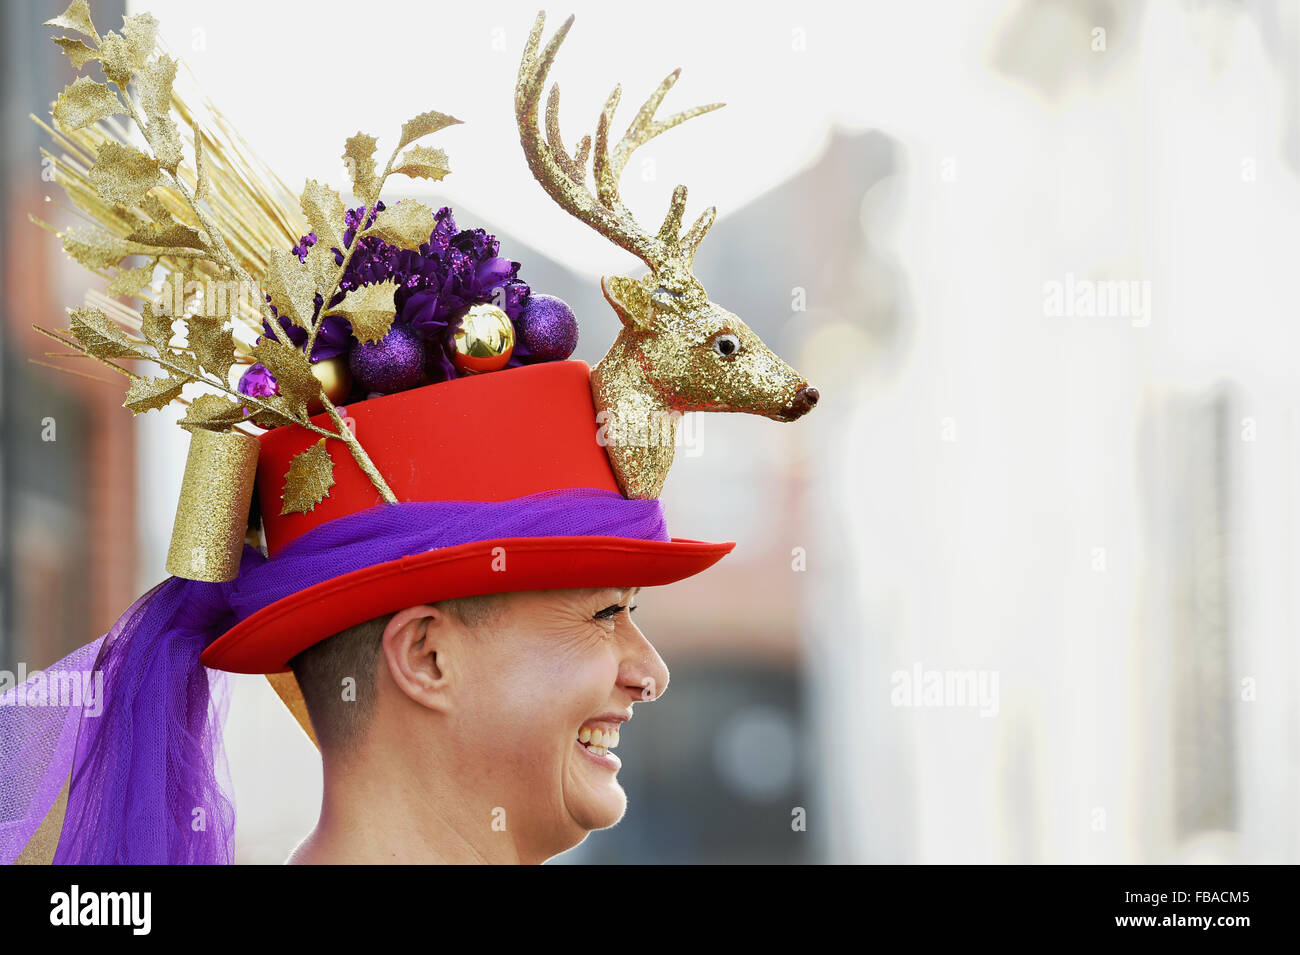 Sara Cutting from Brighton wearing one of her wacky quirky Christmas hats  Stock Photo - Alamy